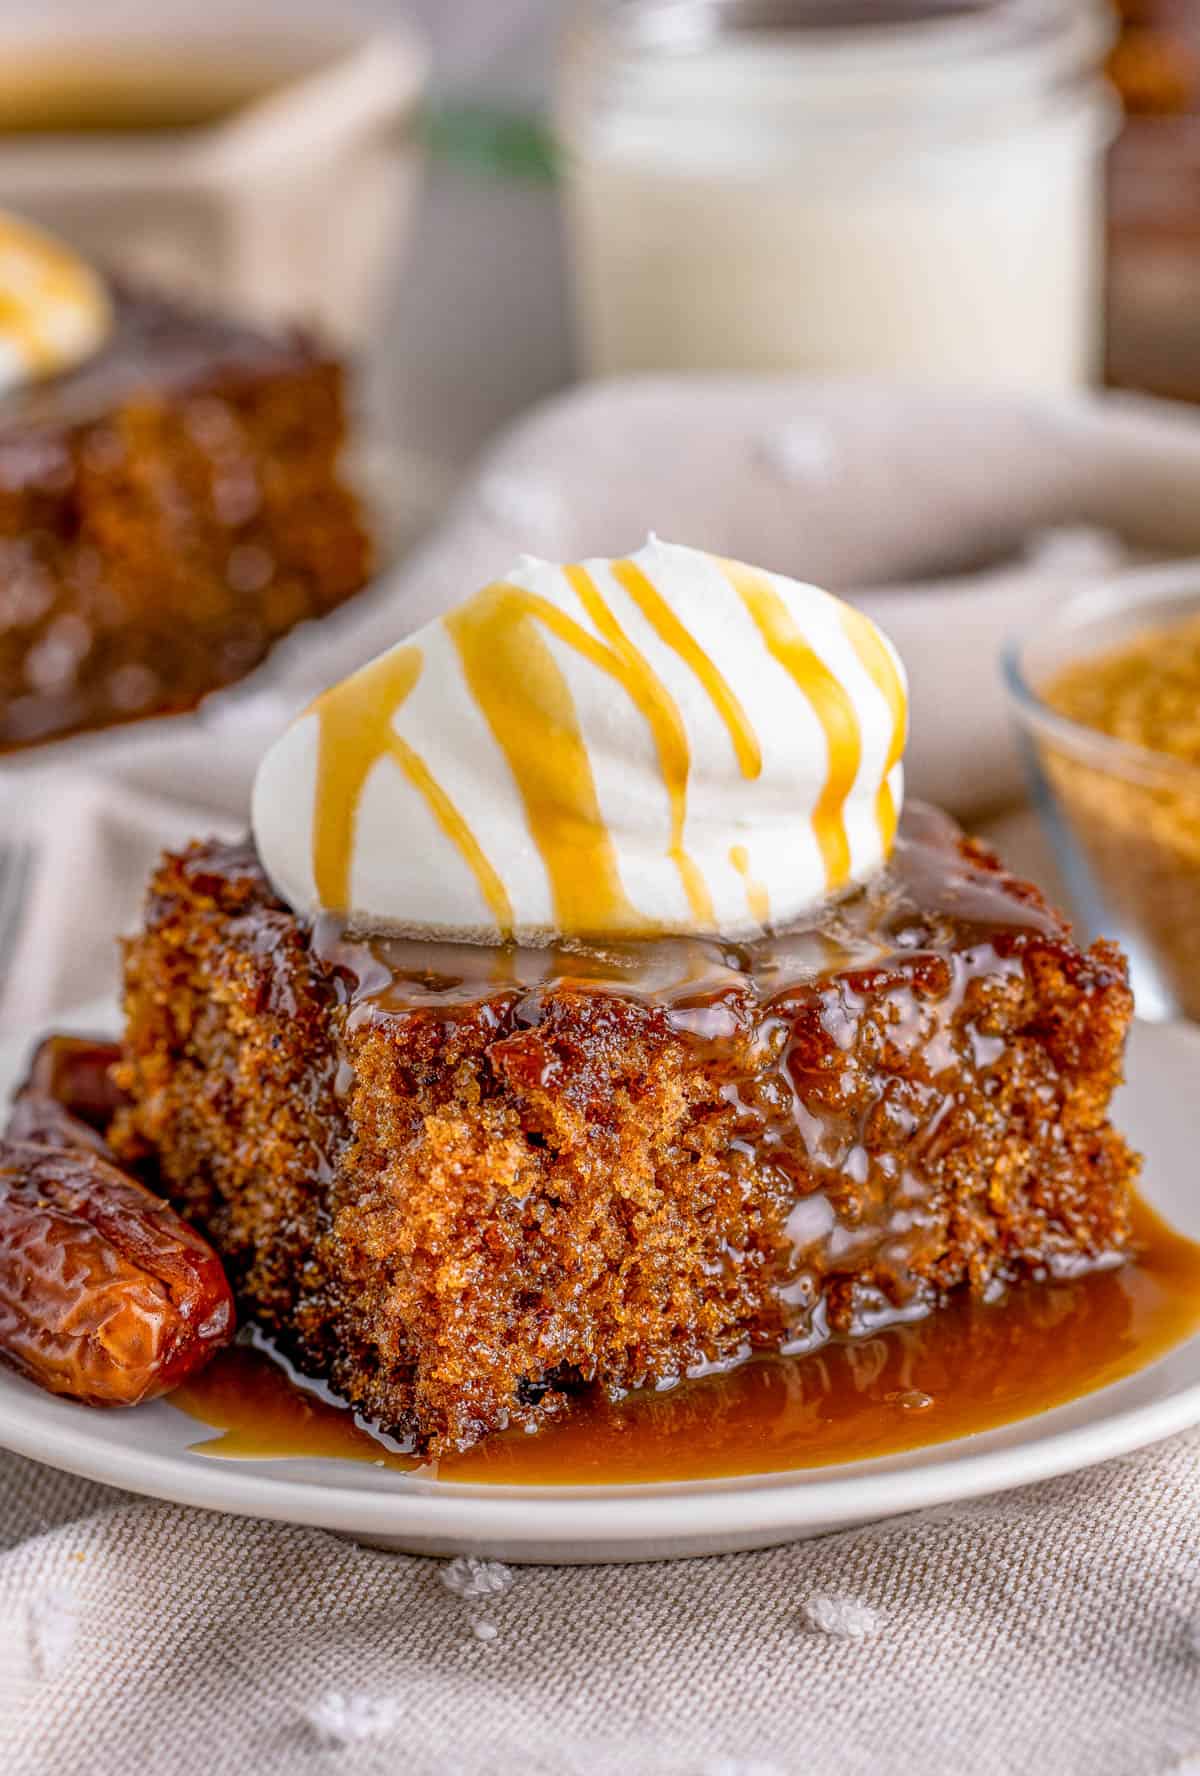 Slice of the Sticky Toffee Pudding Recipe on plate with dates, whipped topping and more sauce poured over top.